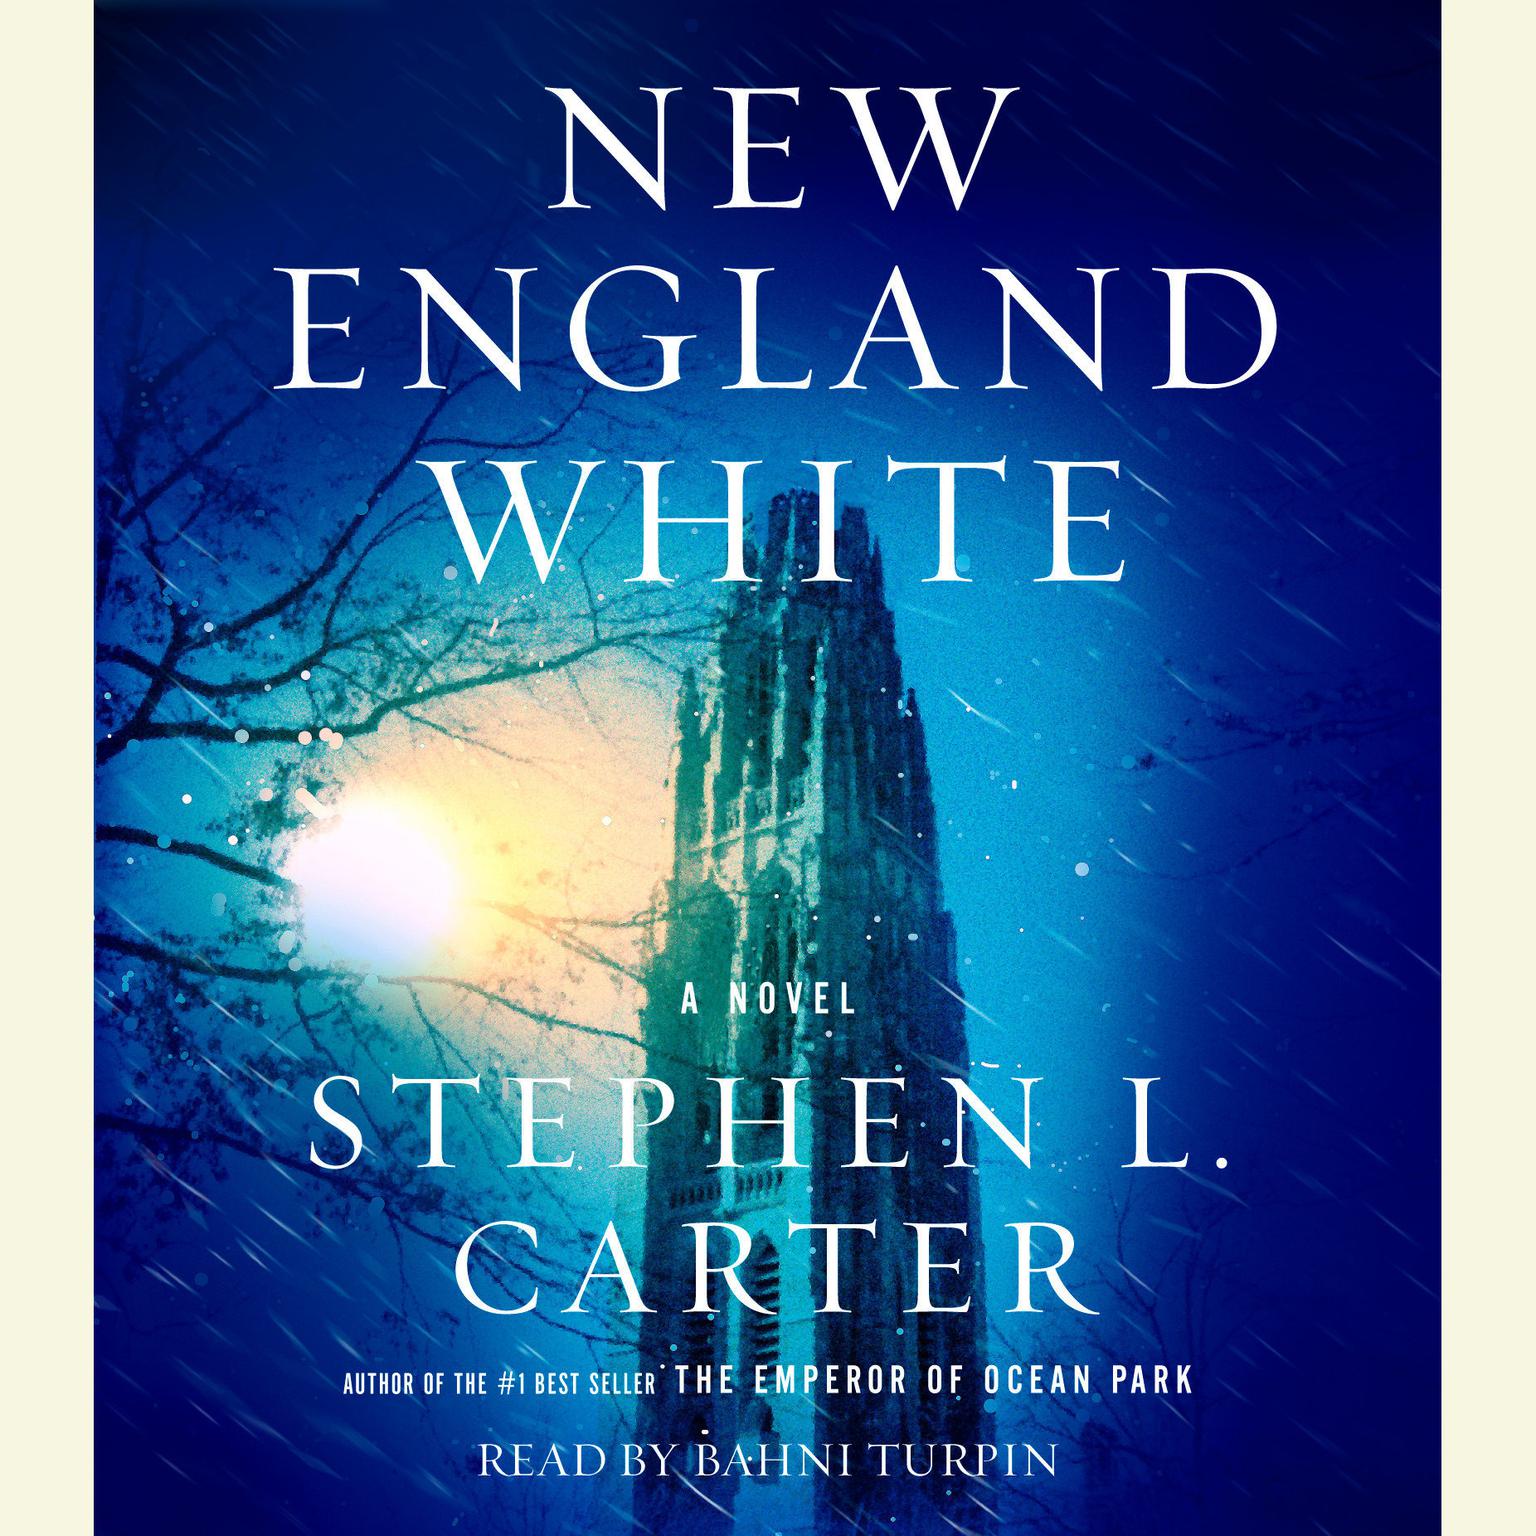 New England White (Abridged) Audiobook, by Stephen L. Carter